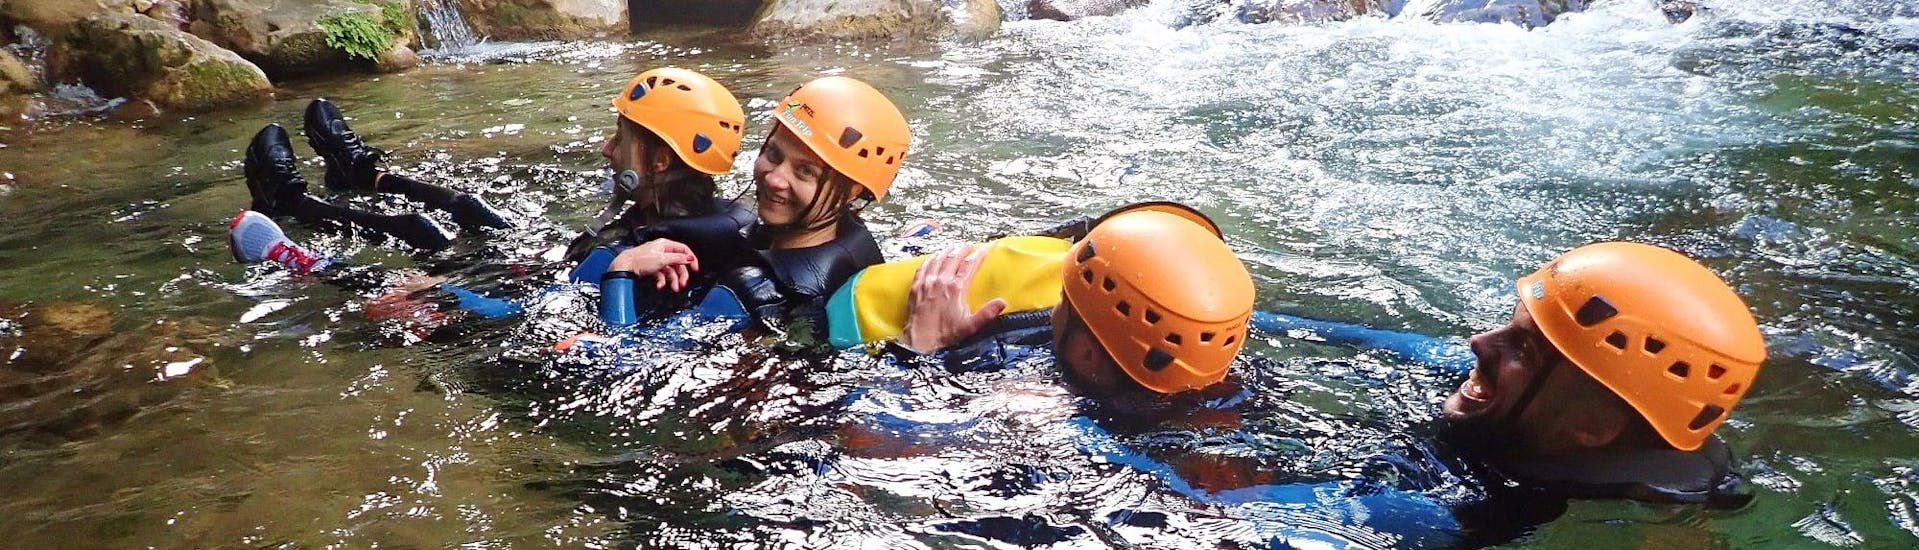 A group of friends are letting themselves be carried along by the current of the river during their River Trekking in Gorges du Loup for Young & Old with FunTrip.